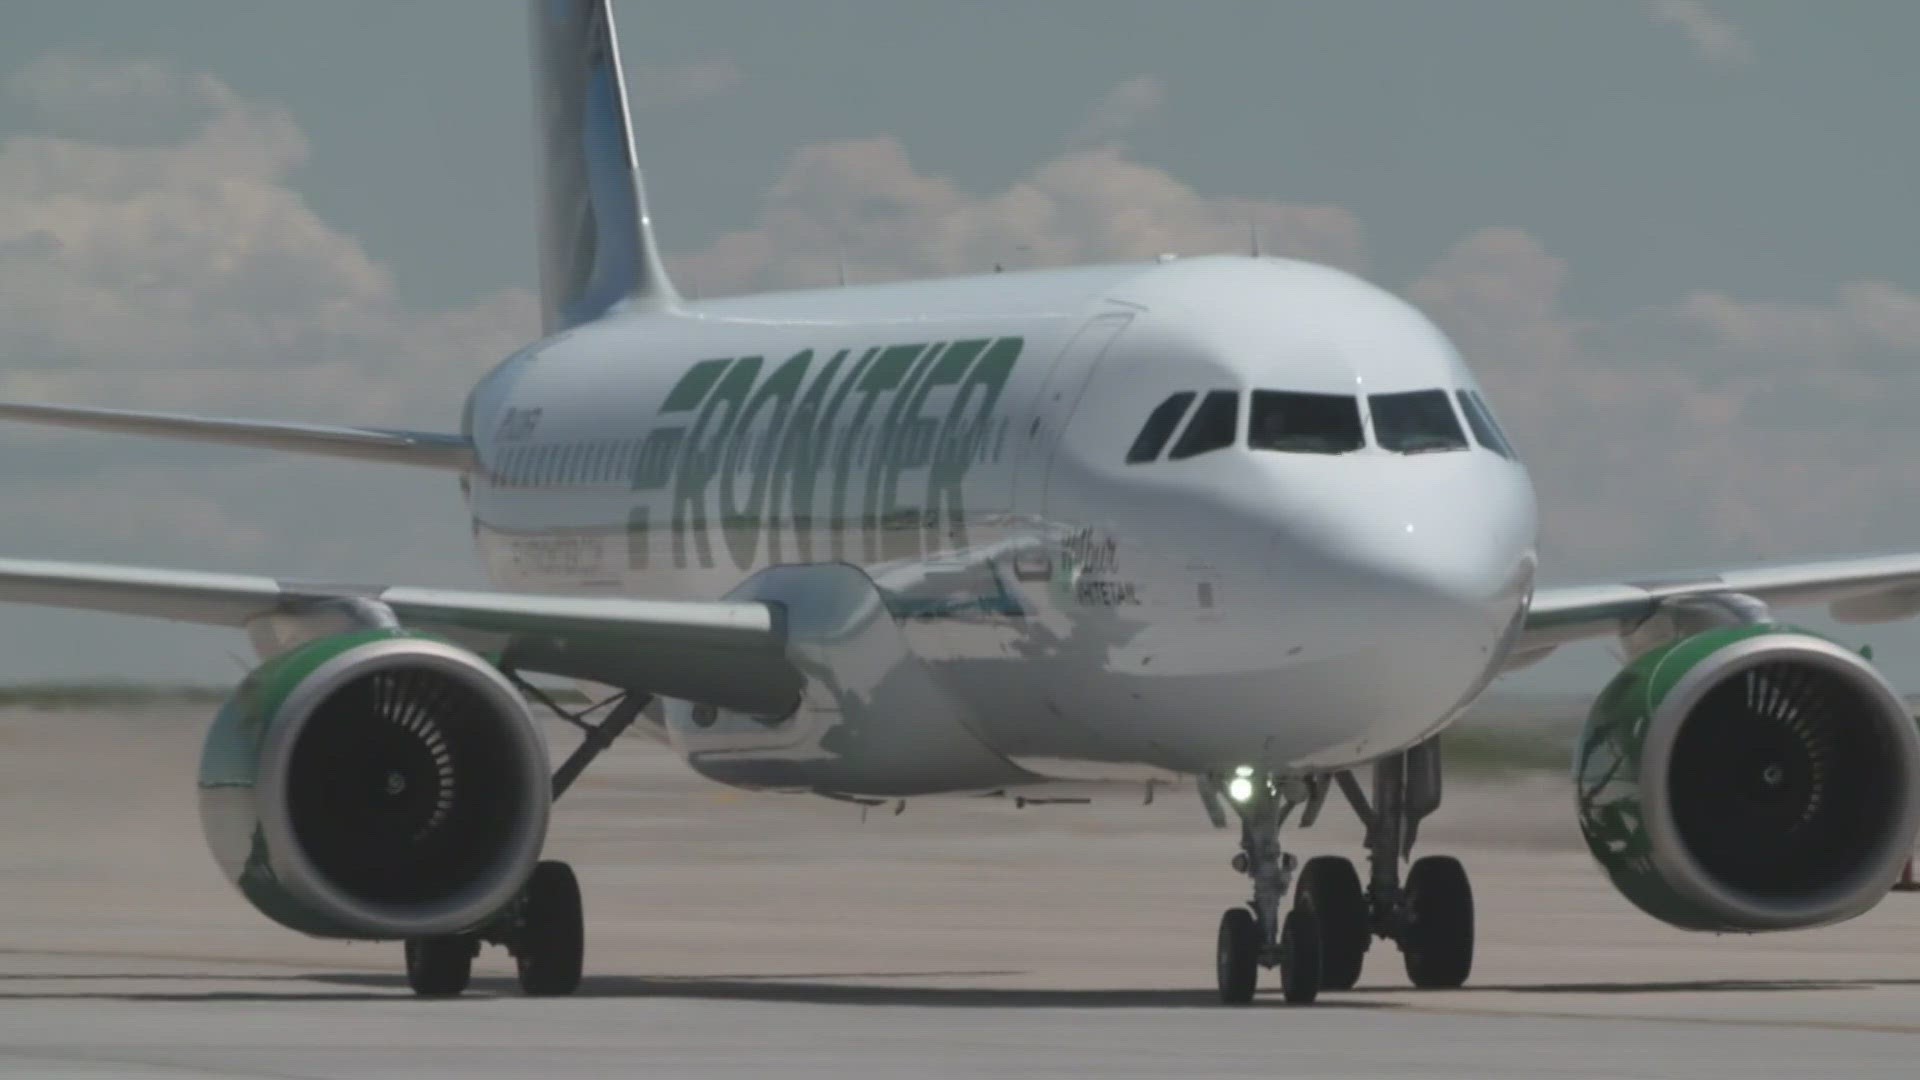 Federal regulators announced they had reached a settlement with Frontier and multiple female employees, then retracted that announcement.